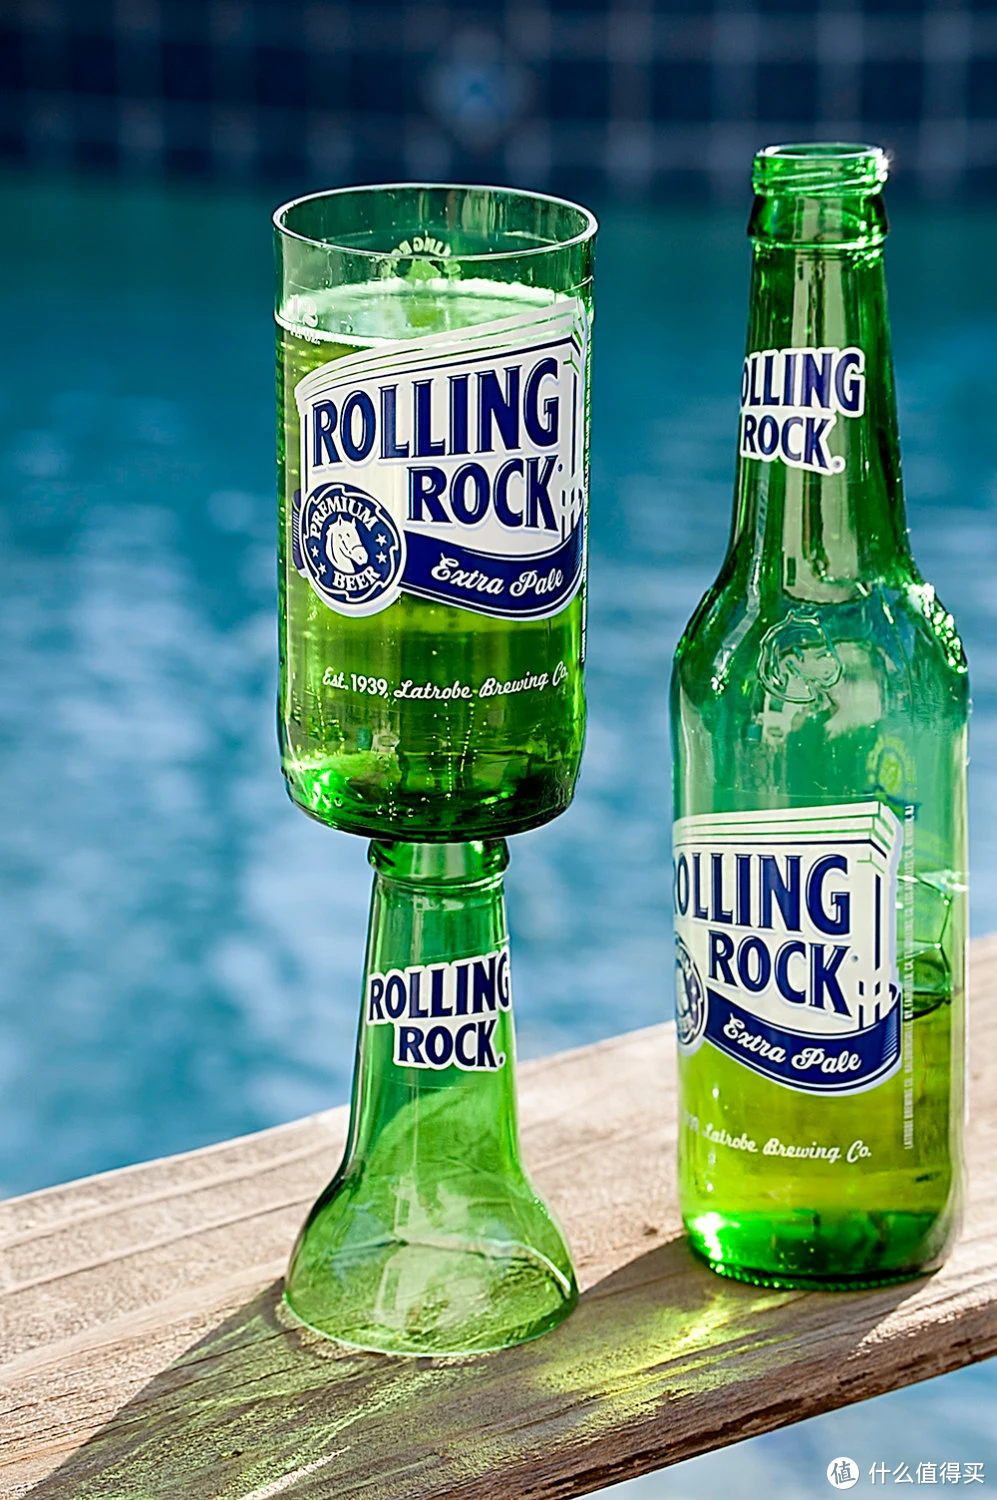 Rolling Rock Extra Pale